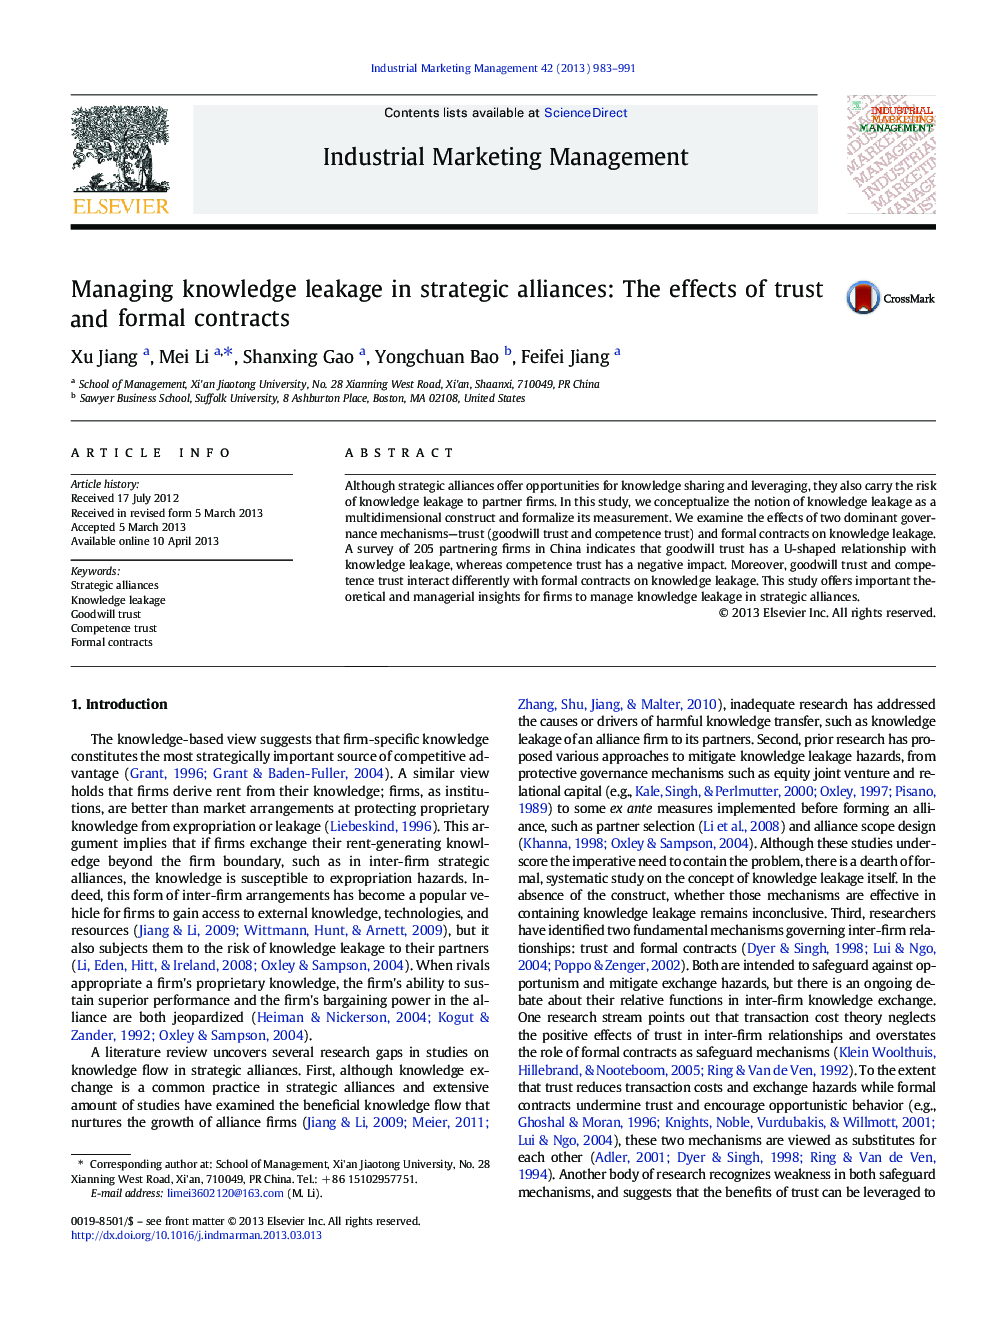 Managing knowledge leakage in strategic alliances: The effects of trust and formal contracts